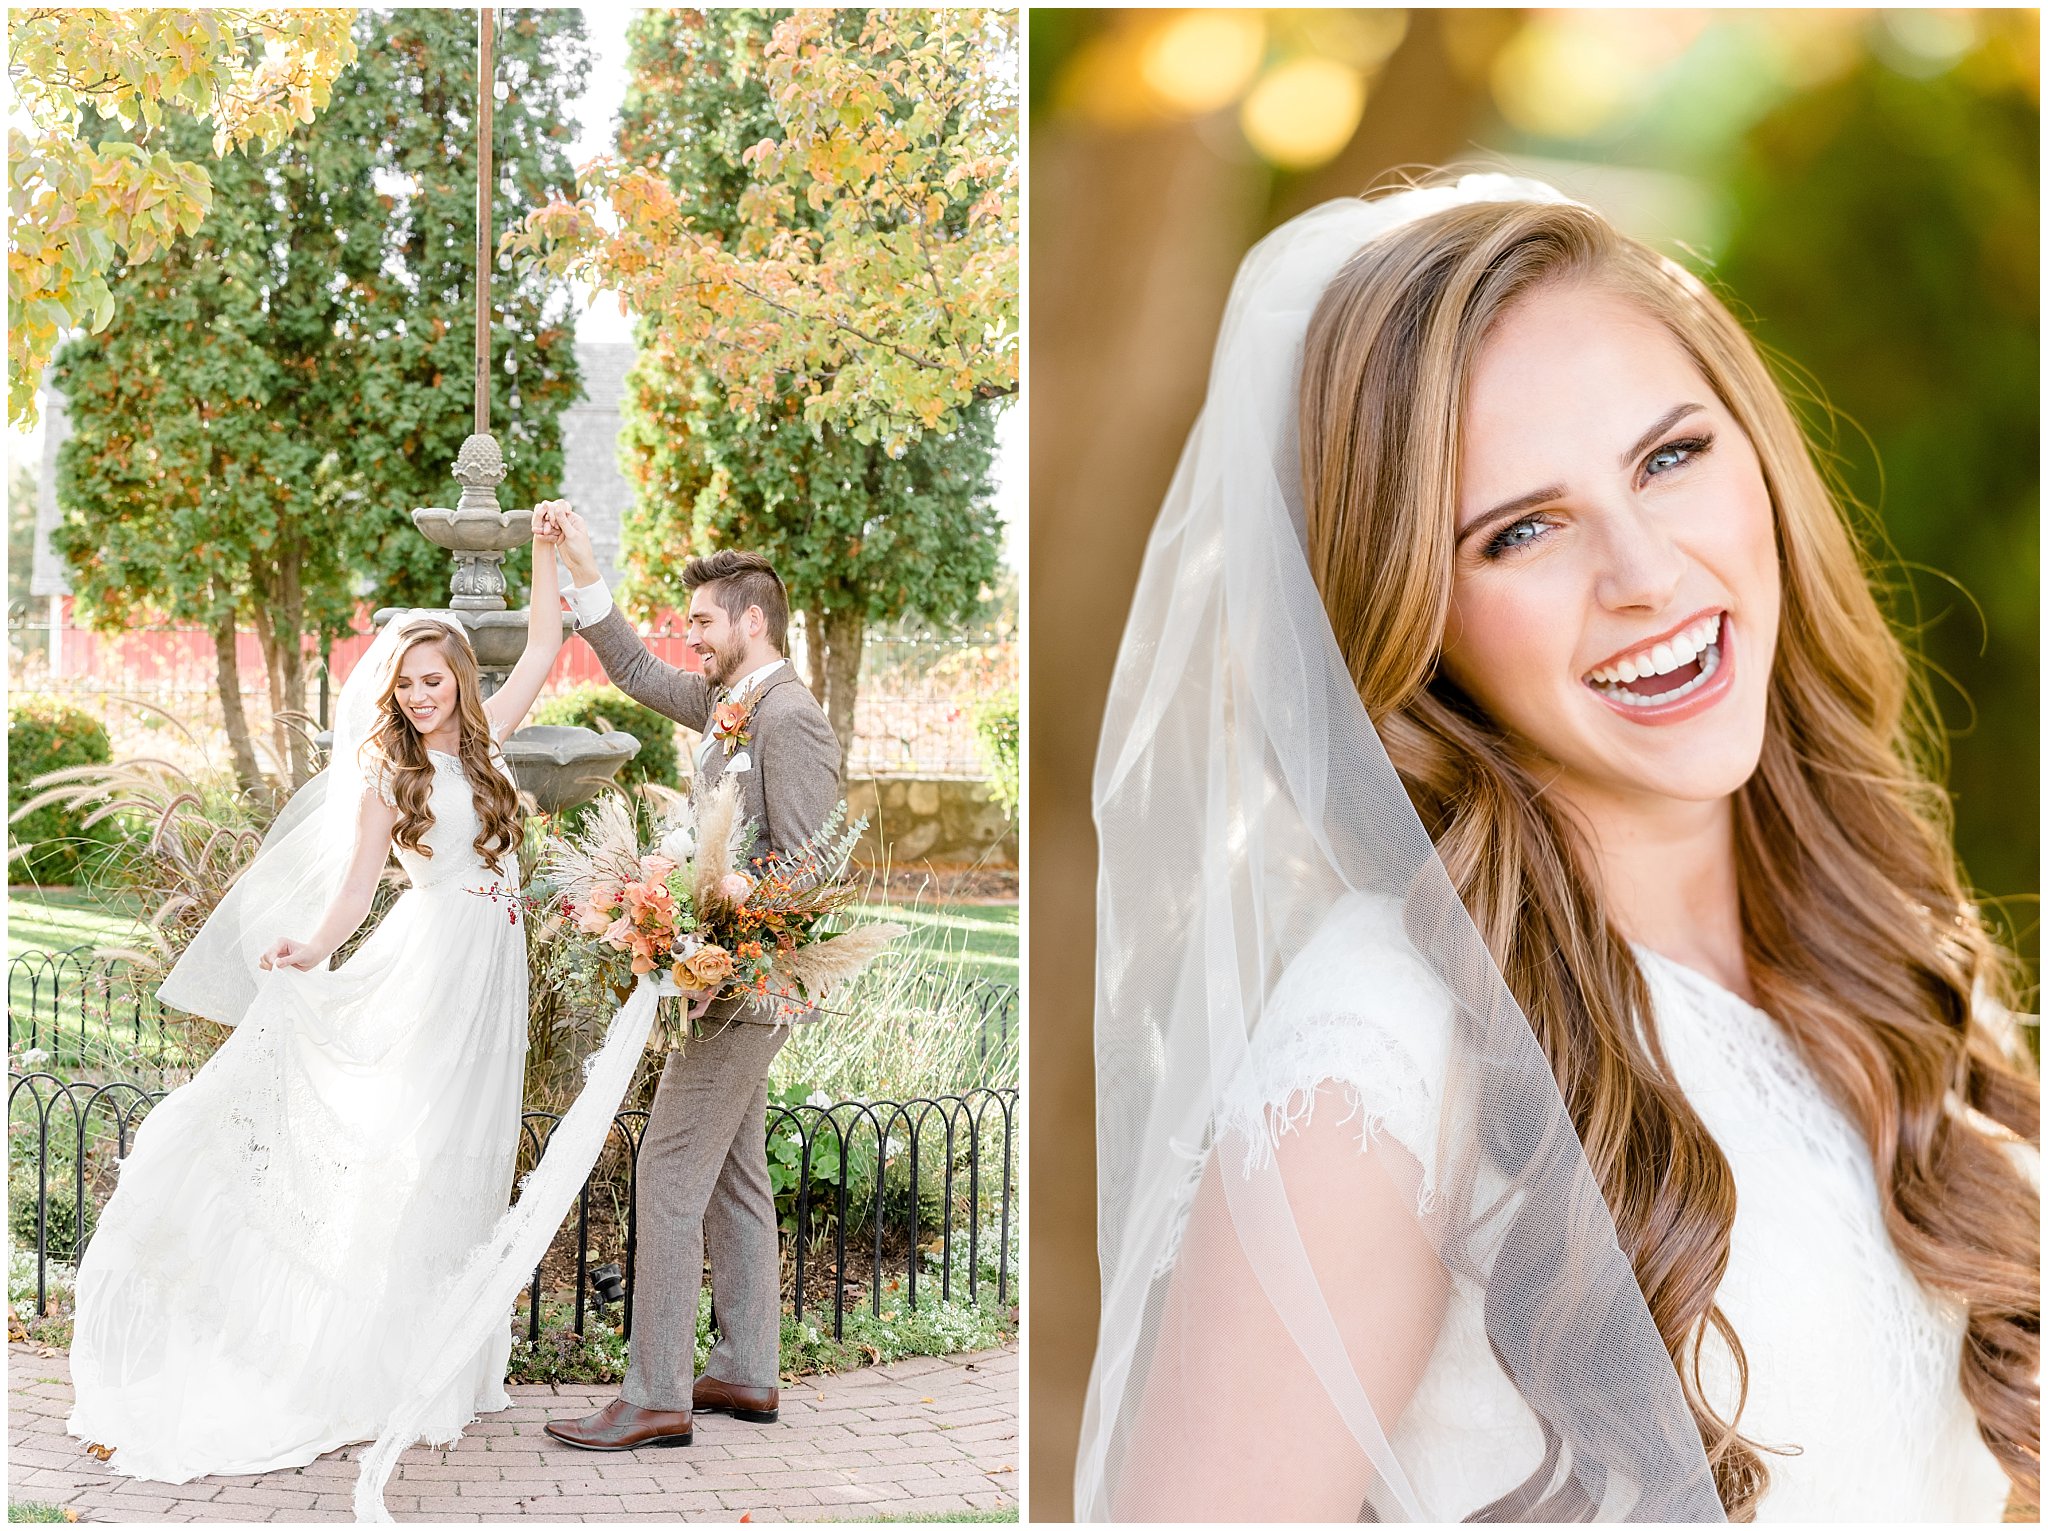 Bride and groom portraits | fun and happy bride and groom | Fall wedding inspiration at Wadley Farms in Utah | Jessie and Dallin Photography